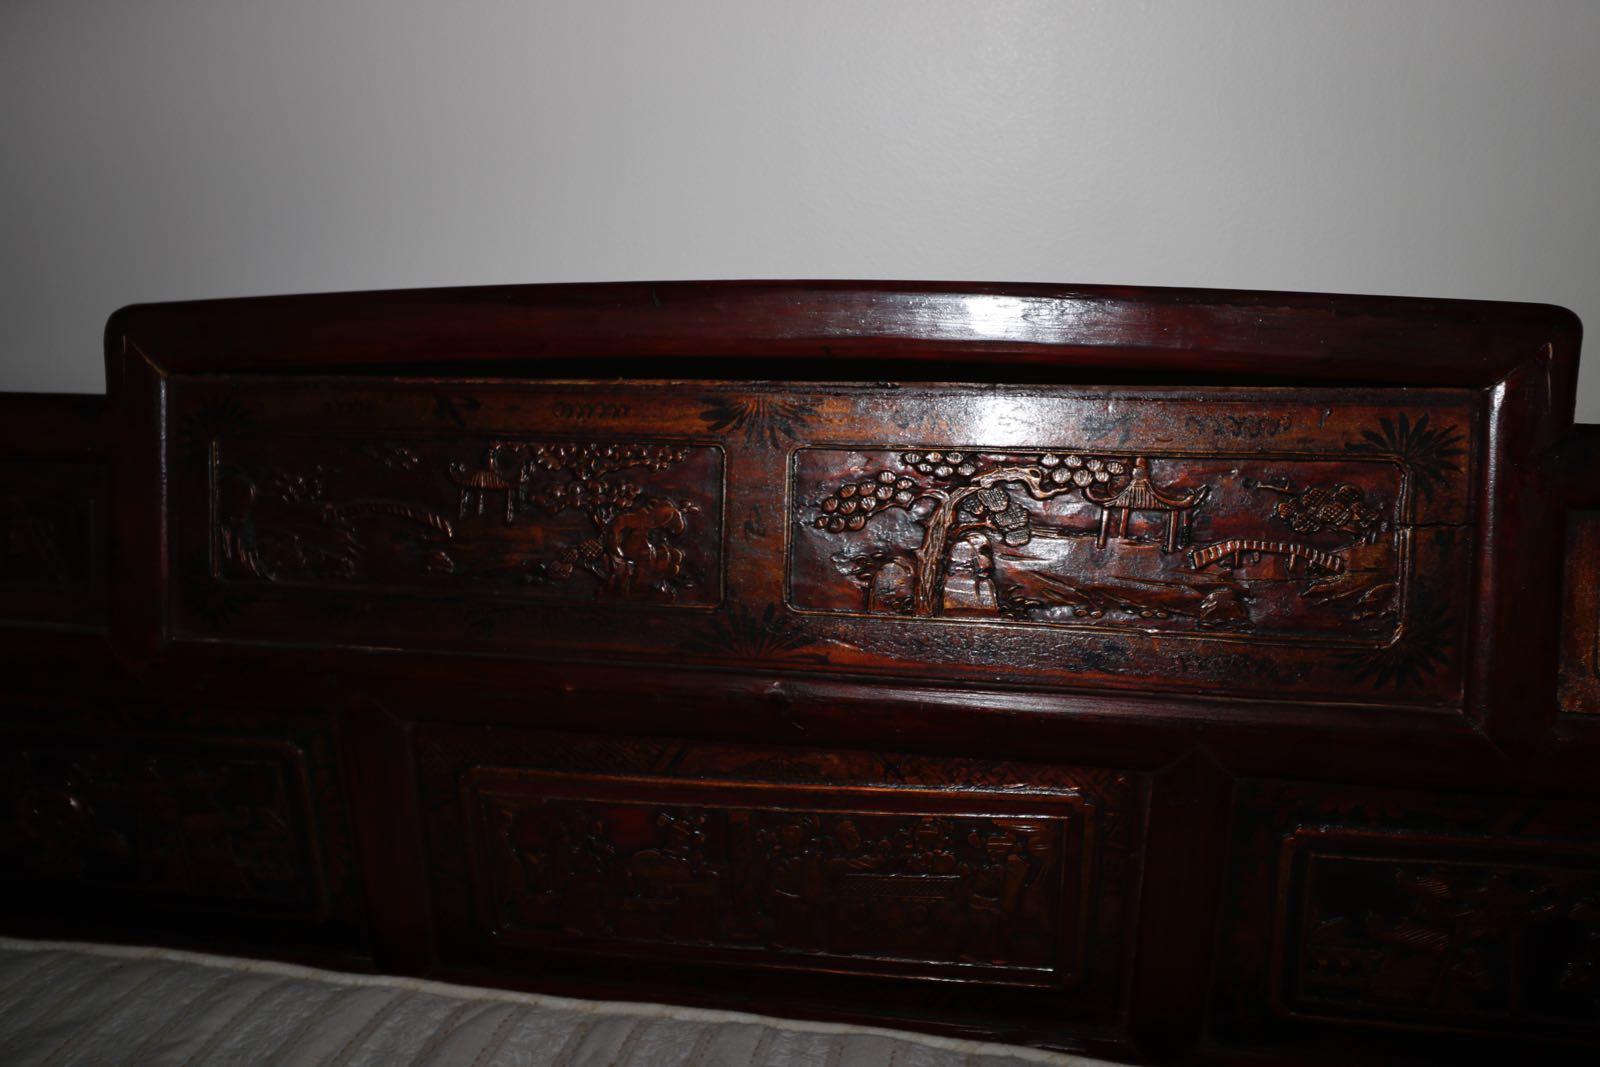 Fabulous late 19th century style hand carved and fabulous Chinese daybed. Cushion can use some TLC. Otherwise in fabulous condition. Great carvings! Solid mahogany.